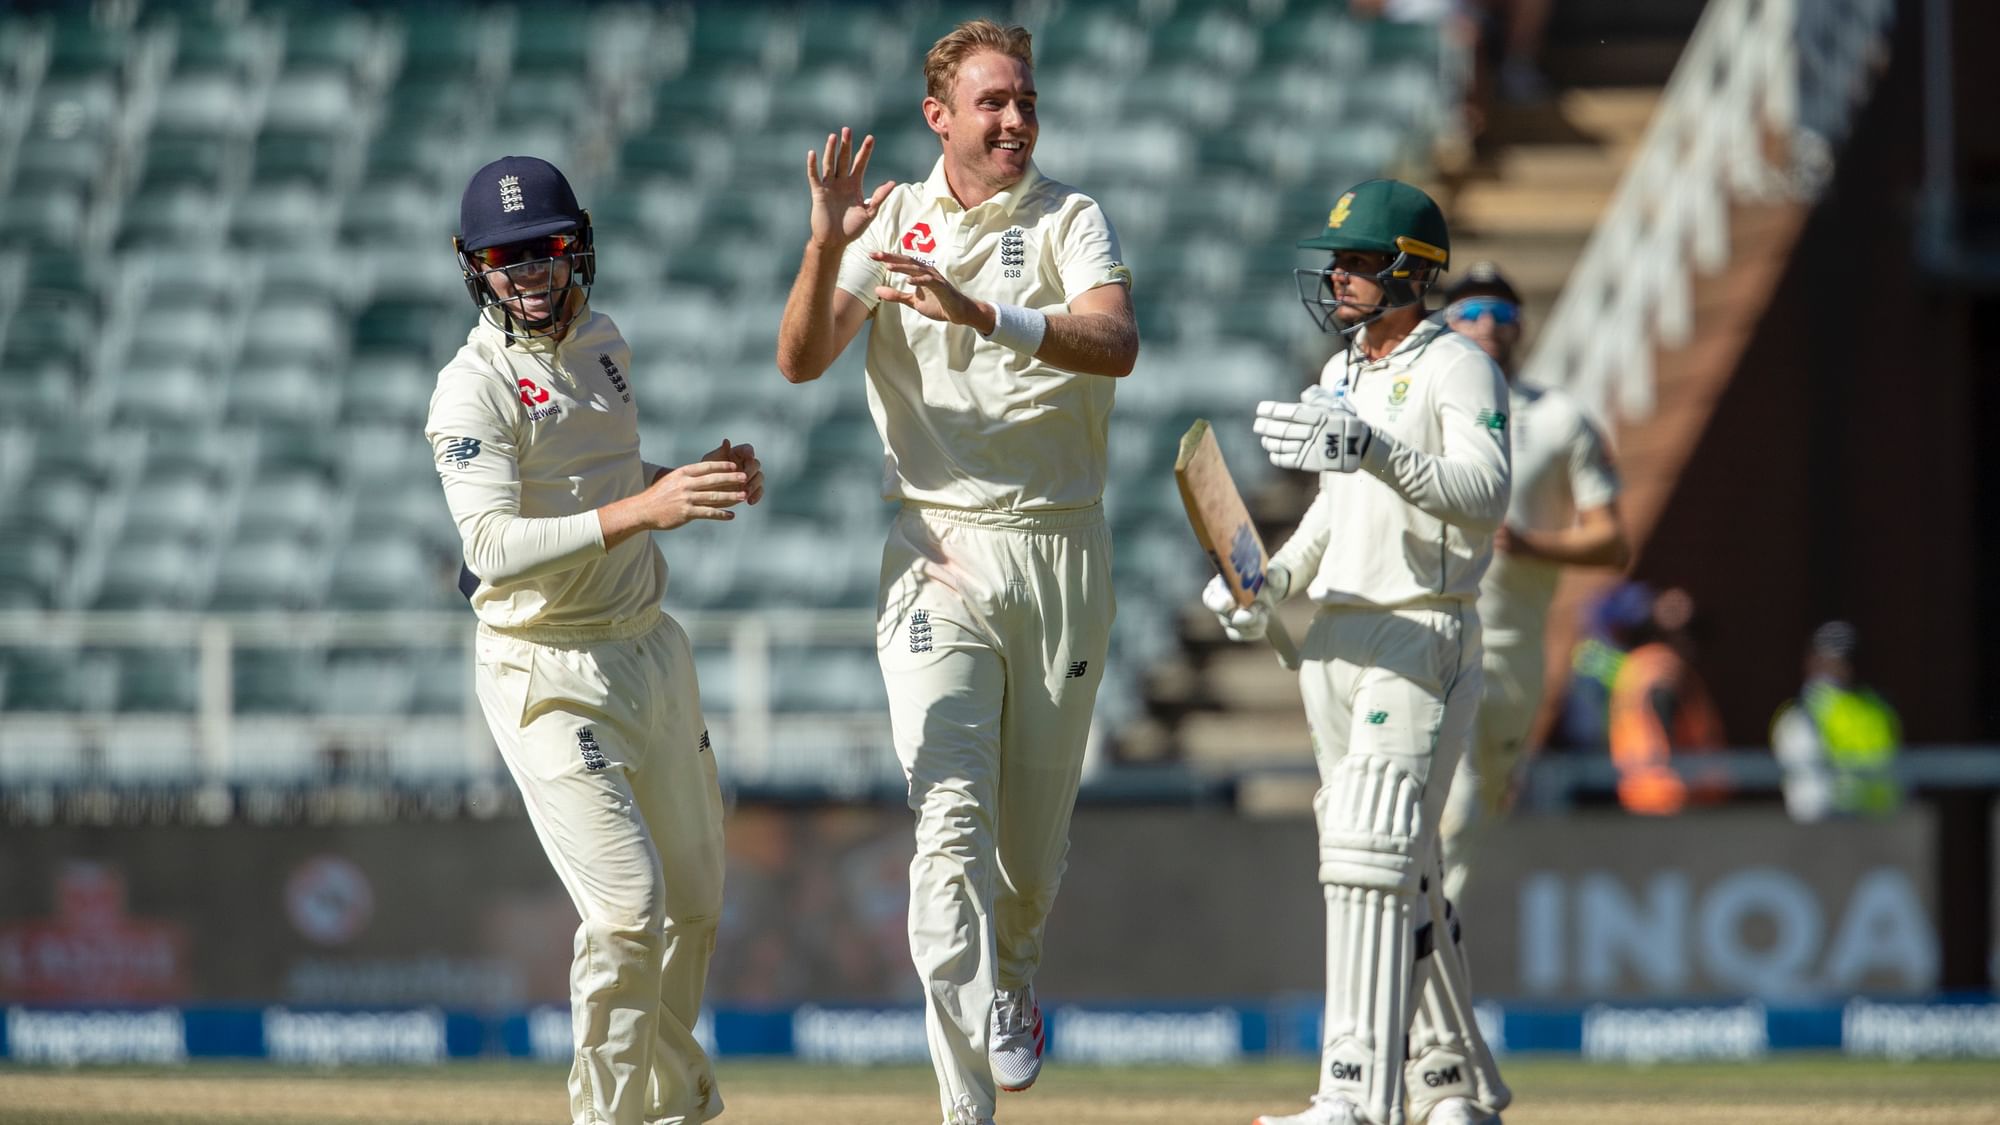 Stuart Broad has been fined 15 percent of his match fee by the ICC for the profanity he directed at South African captain Faf du Plessis during the fourth Test between the two sides.